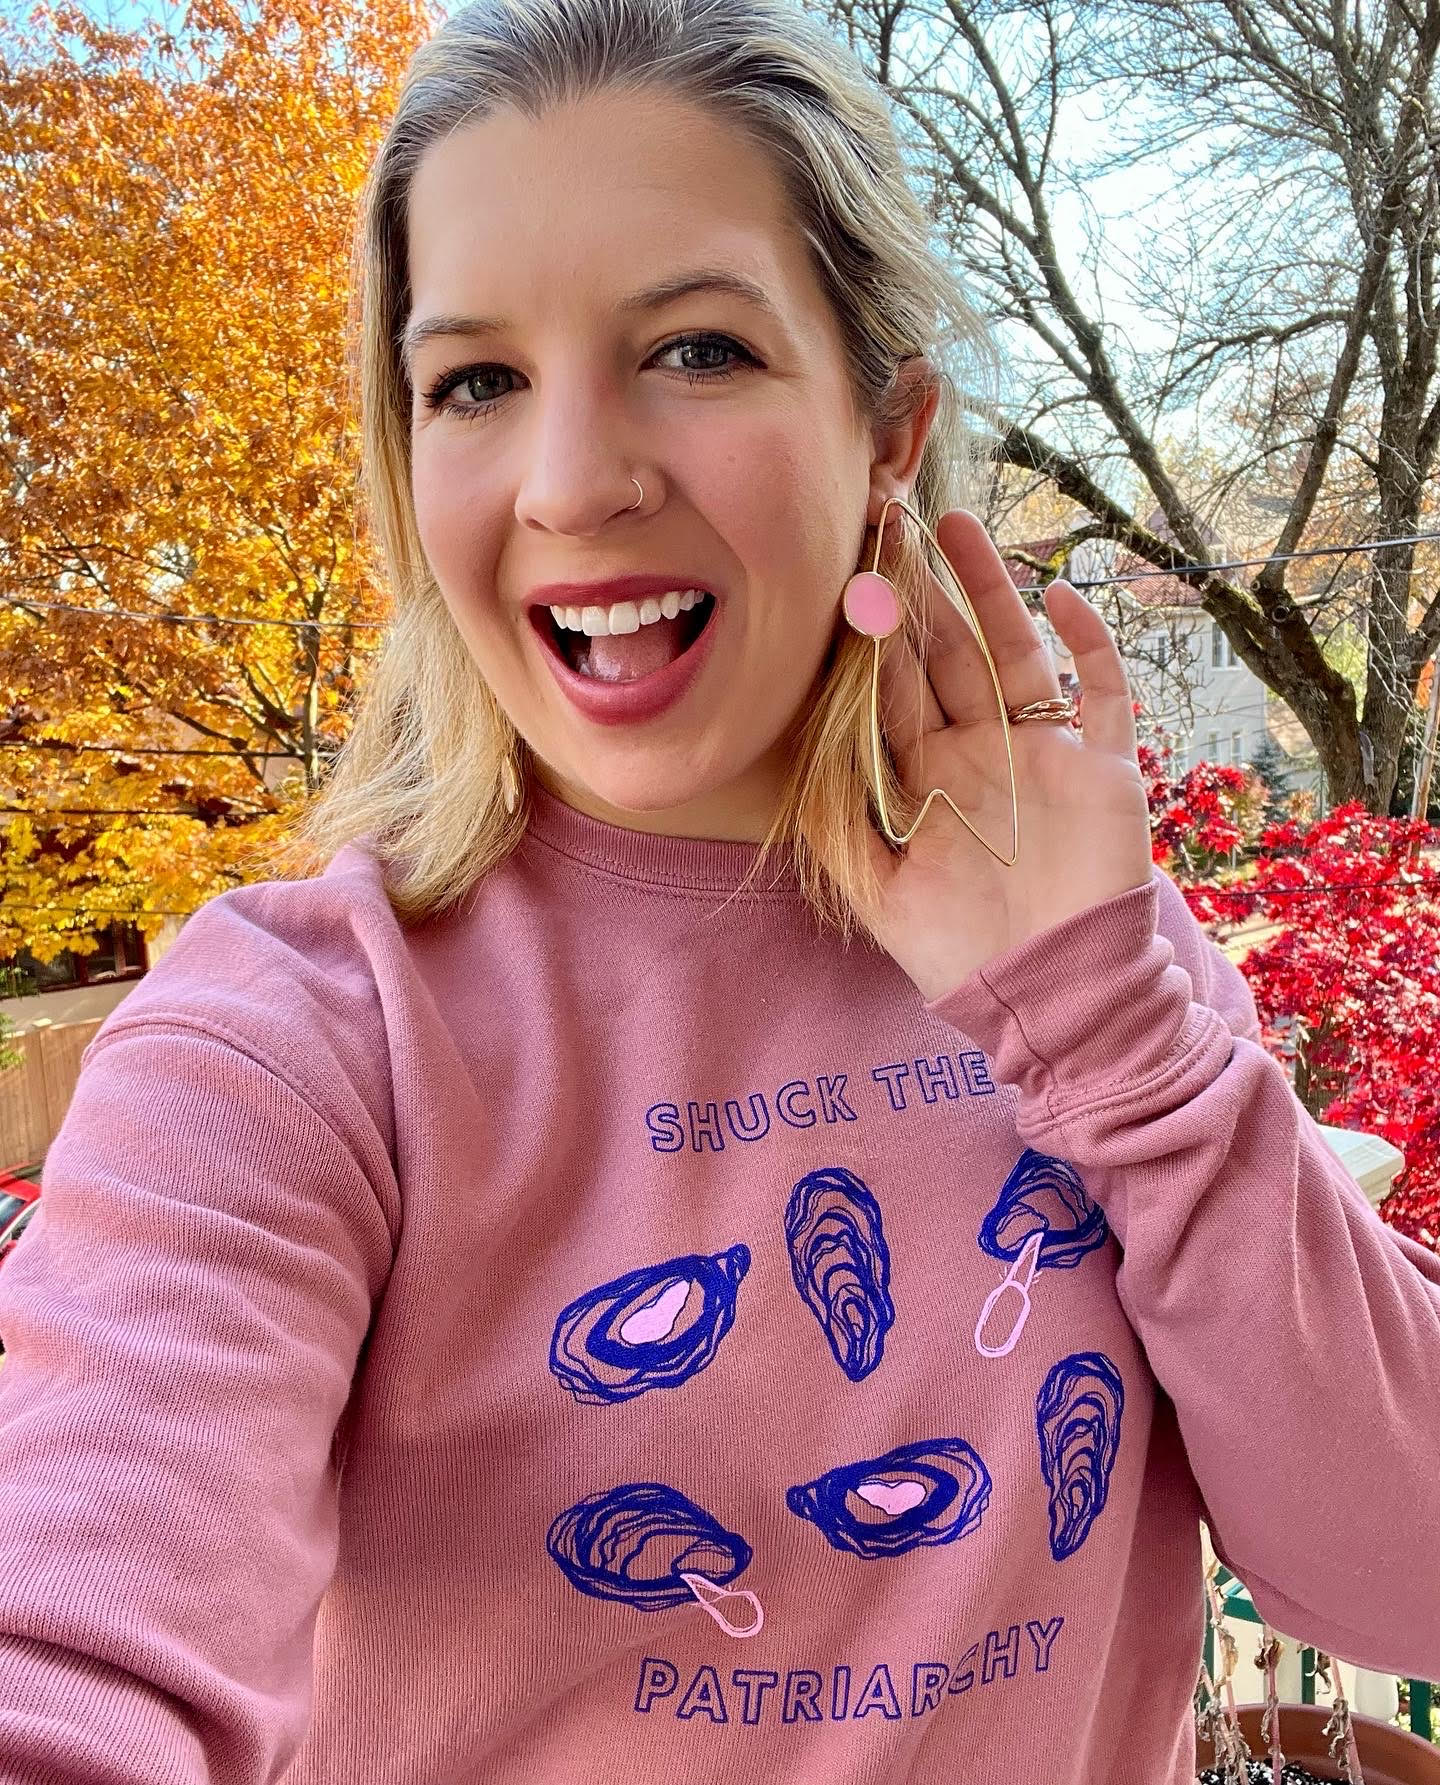 A woman wears a pink "Shuck the Patriarchy" crewneck with matching earrings